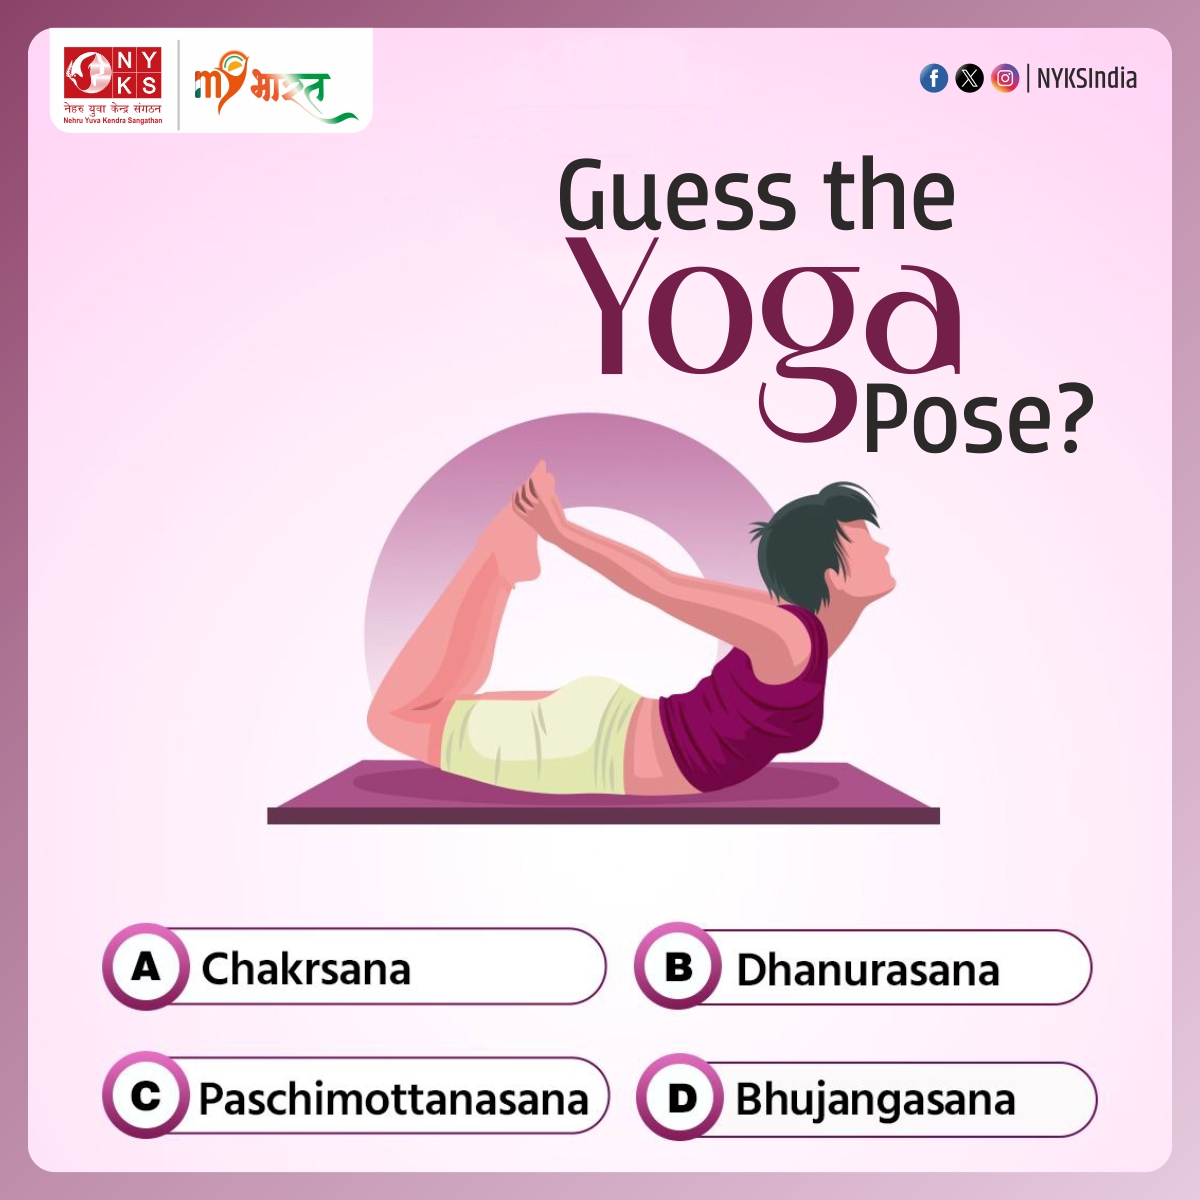 Time to put your yoga knowledge to the test! Can you guess this yoga pose? Drop your answers below! 🧘‍♂️✨ #NYKS4Yoga #GuessThePose #HealthyLife #fitness @Anurag_Office @ianuragthakur @YASMinistry @NisithPramanik @NITKM2021 @mdniy @moayush @mybharatgov